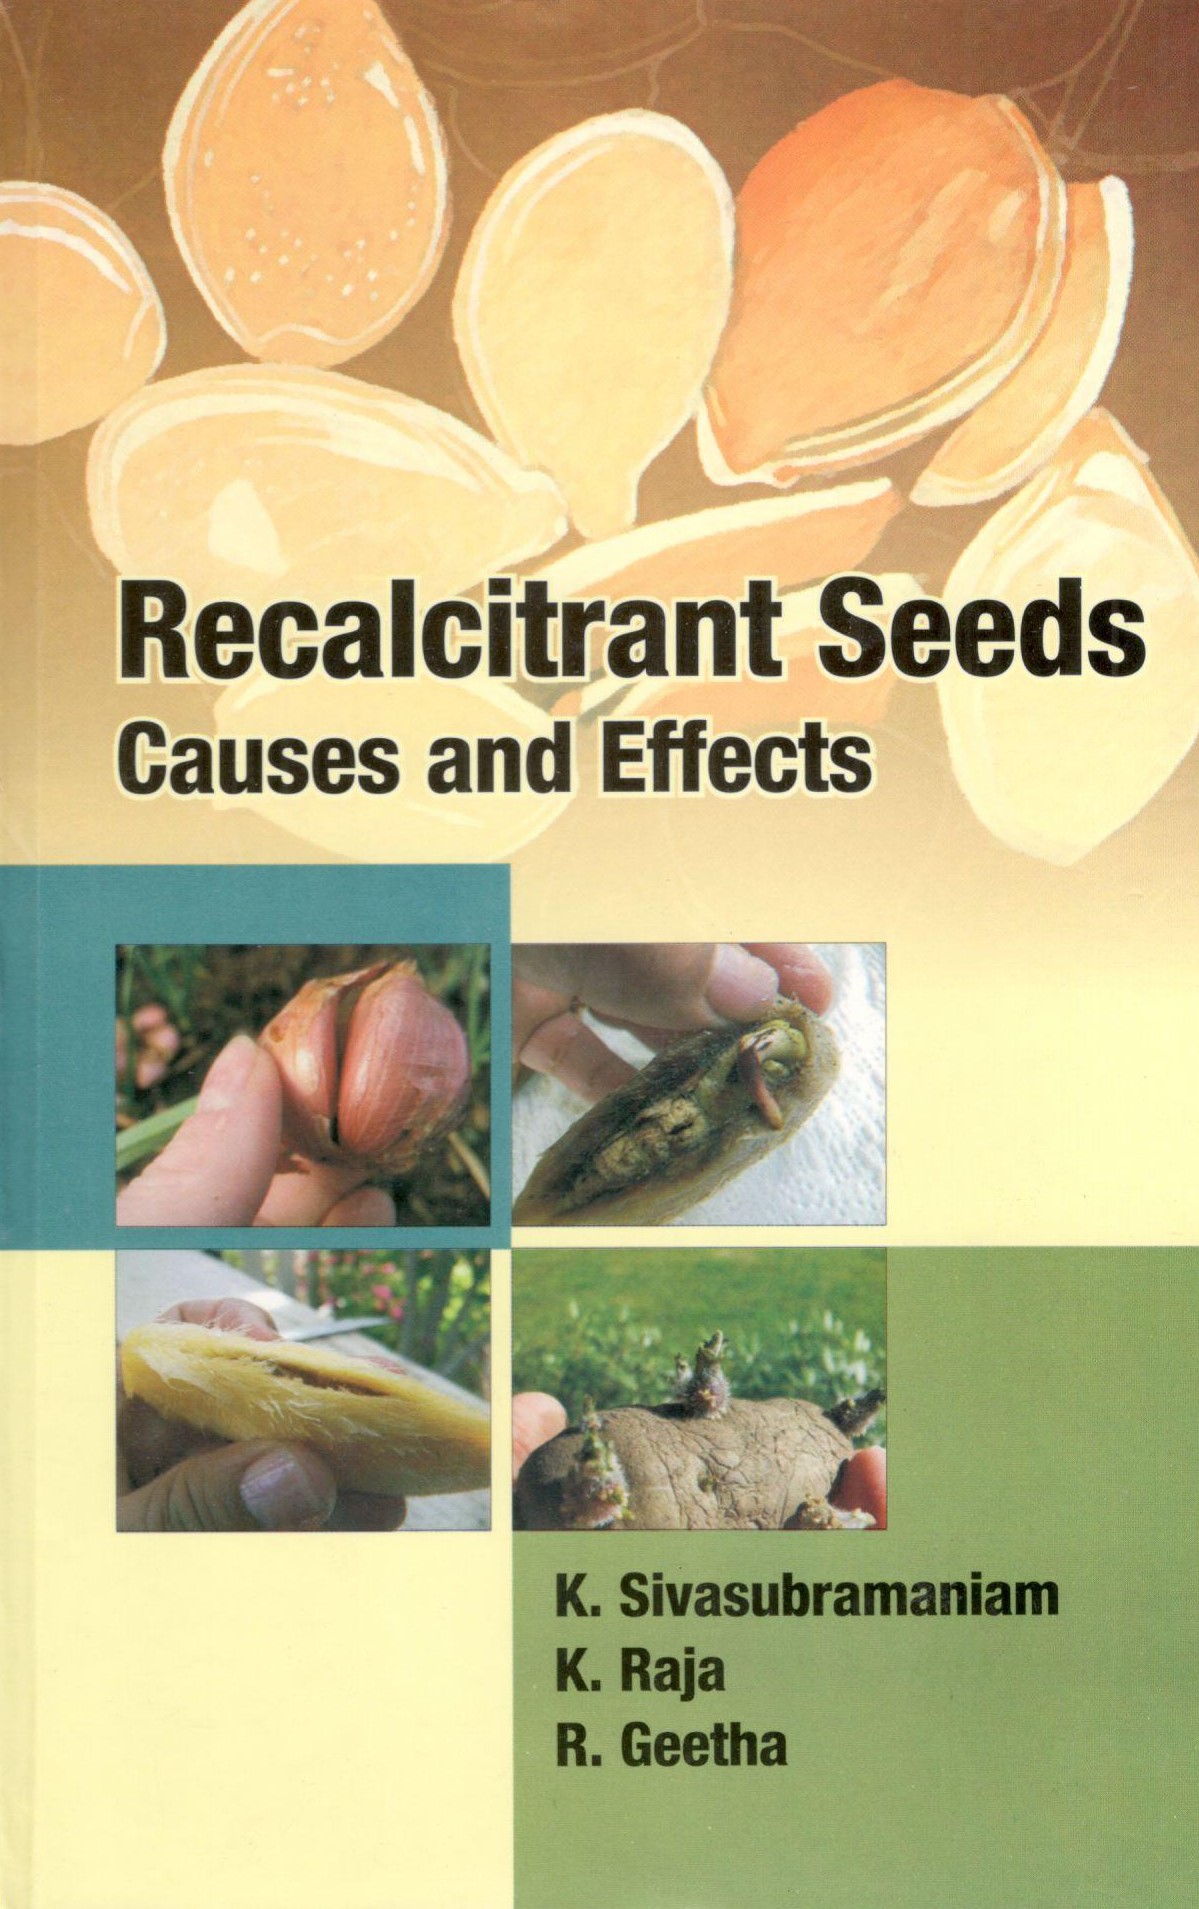 Recalcitrant Seeds Causes & Effects